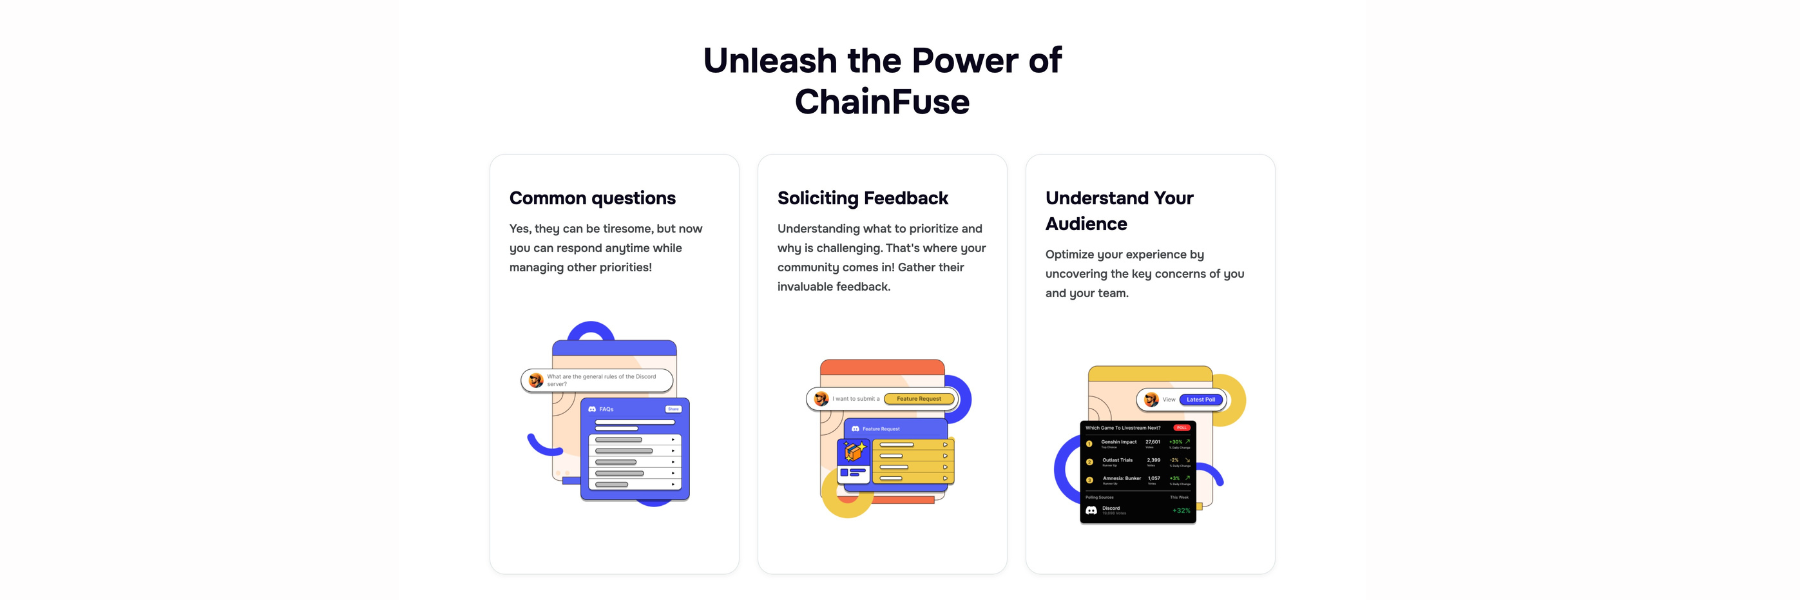 Chainfuse